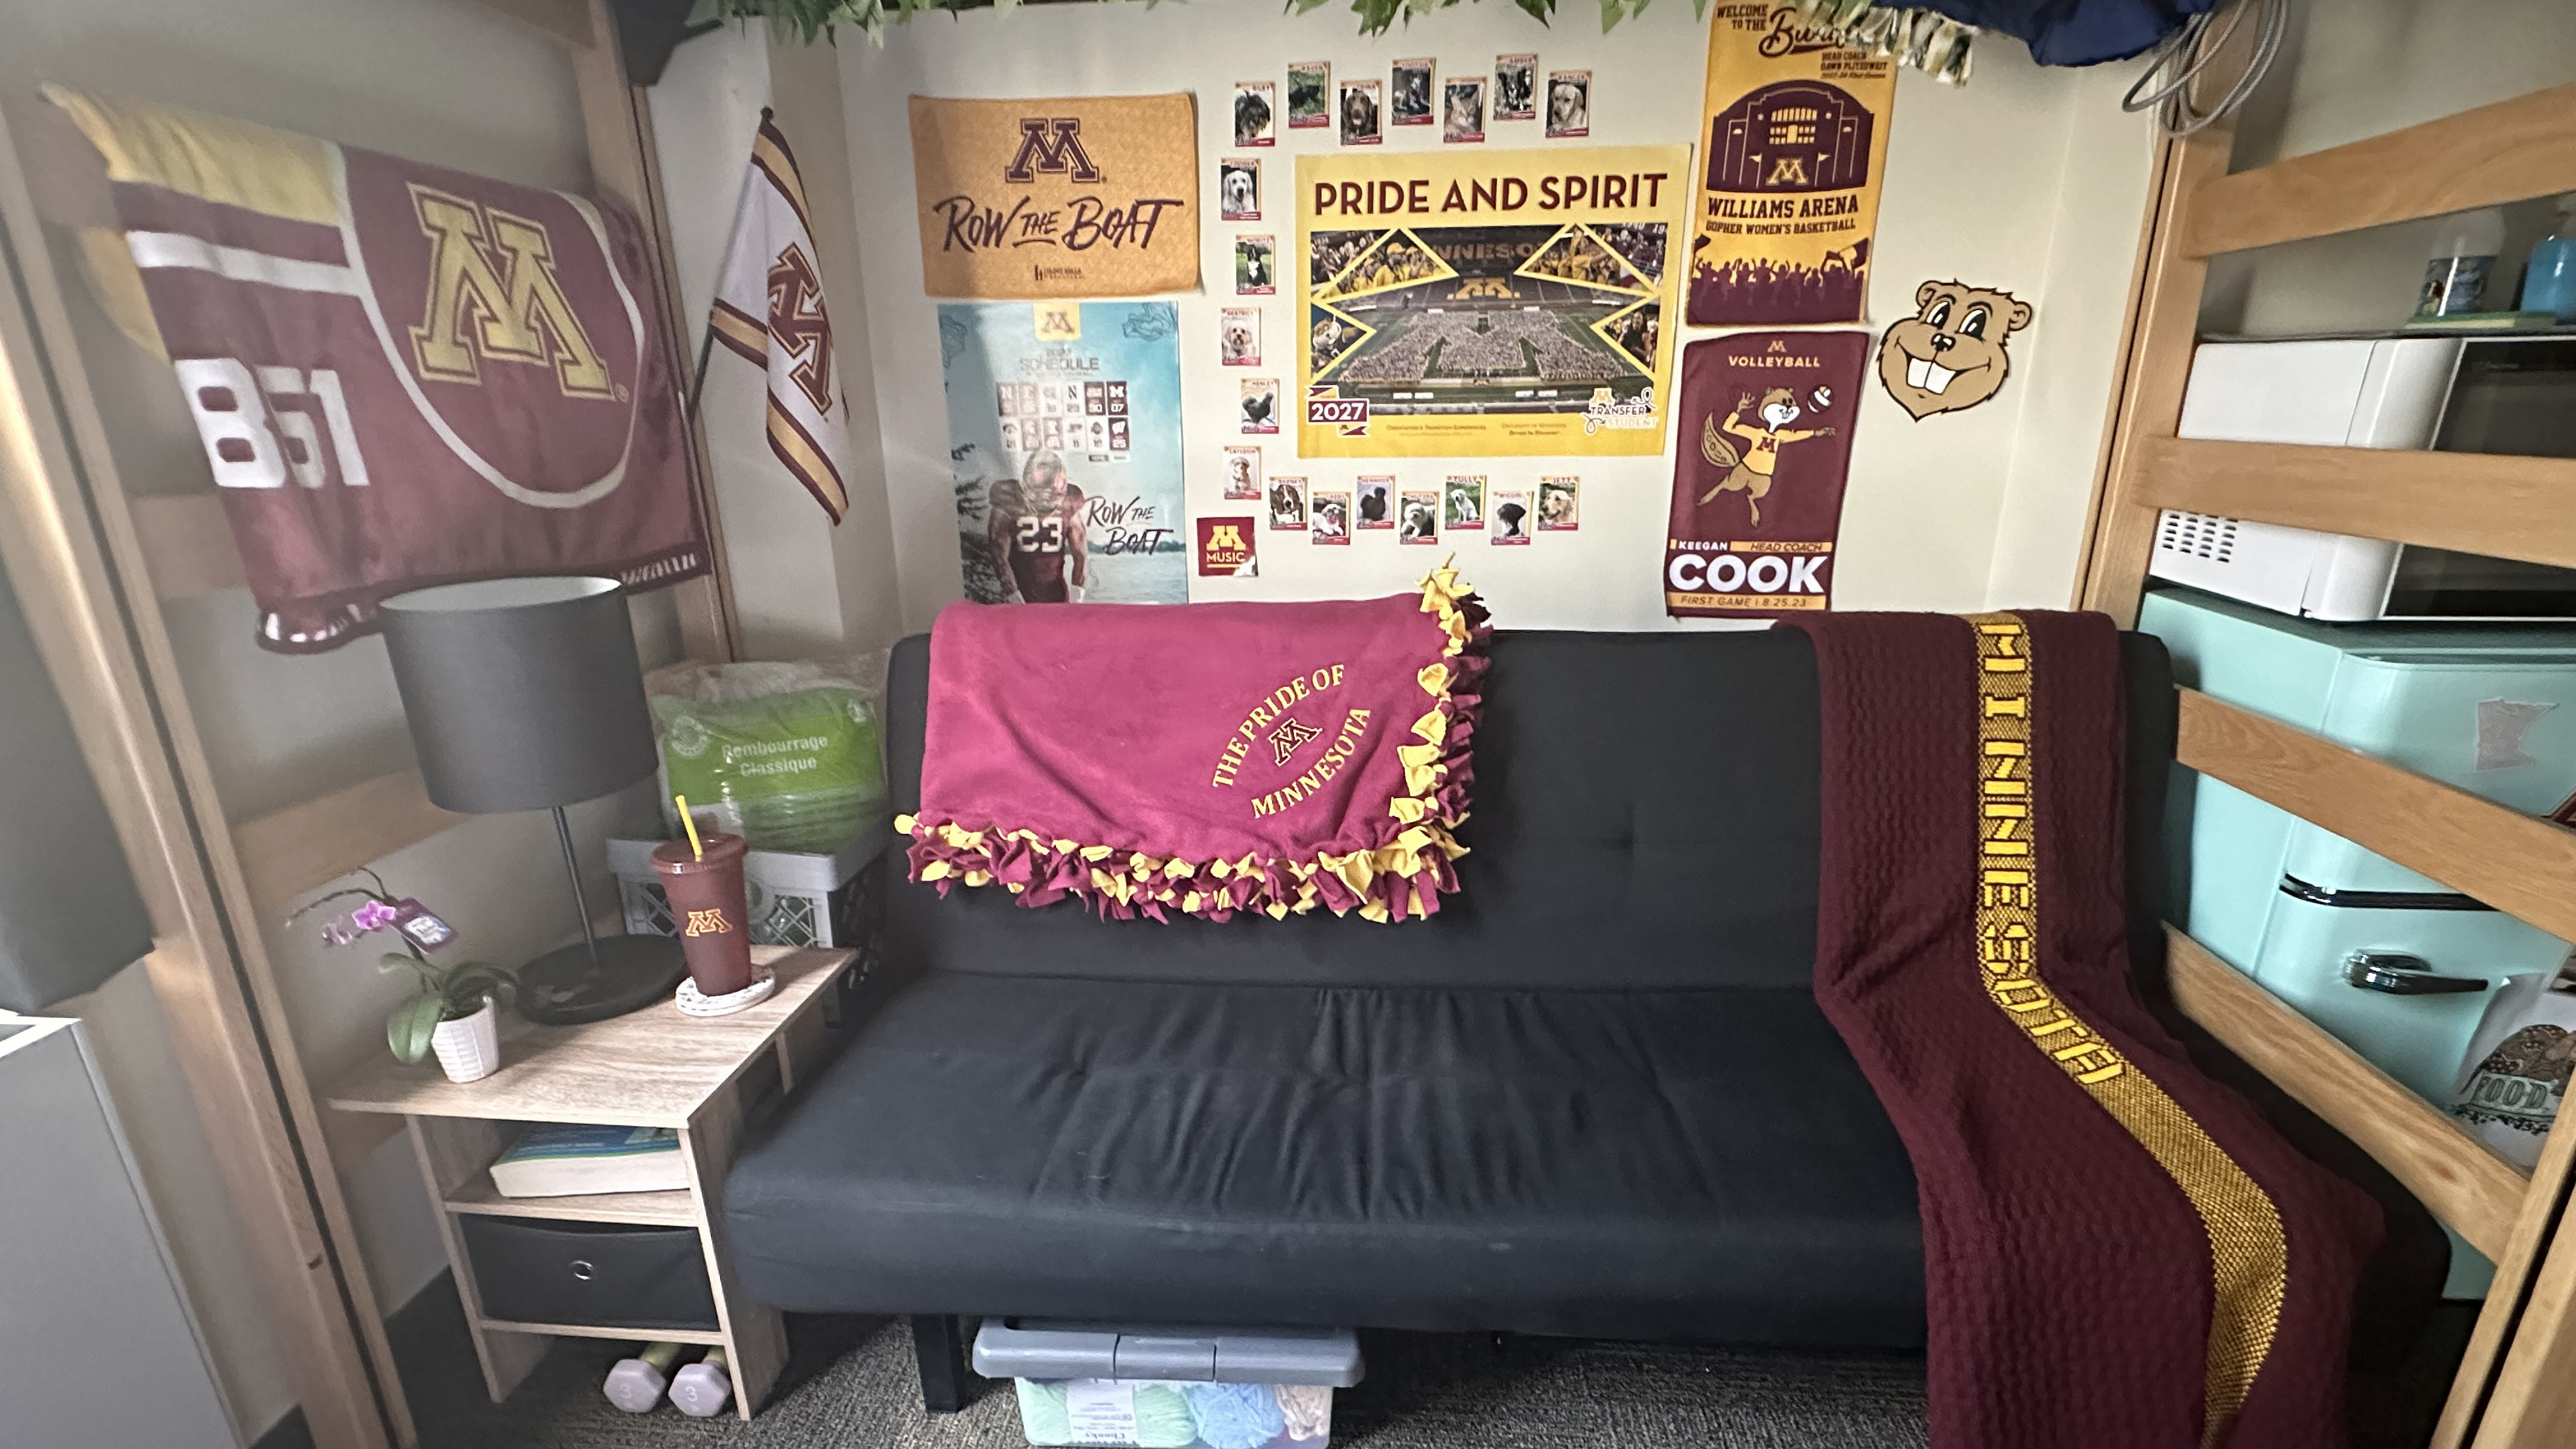 2024 Goldy Room. A black futon under a lofted bed with two maroon U of M blankets on it. U of M posters on the wall behind.